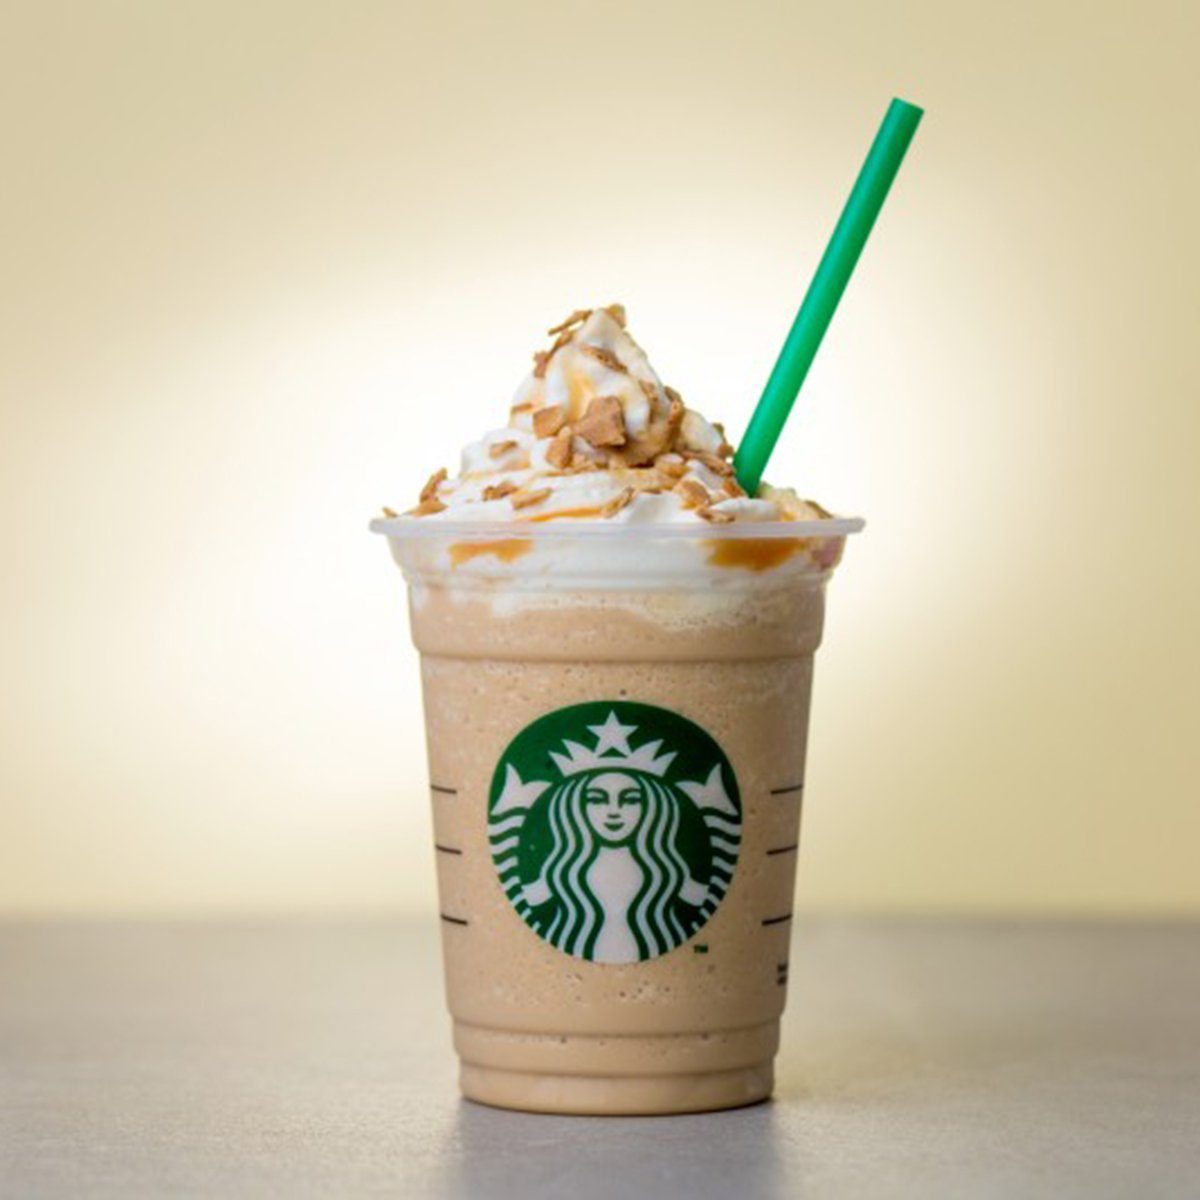 How many calories in a tall light caramel frappuccino